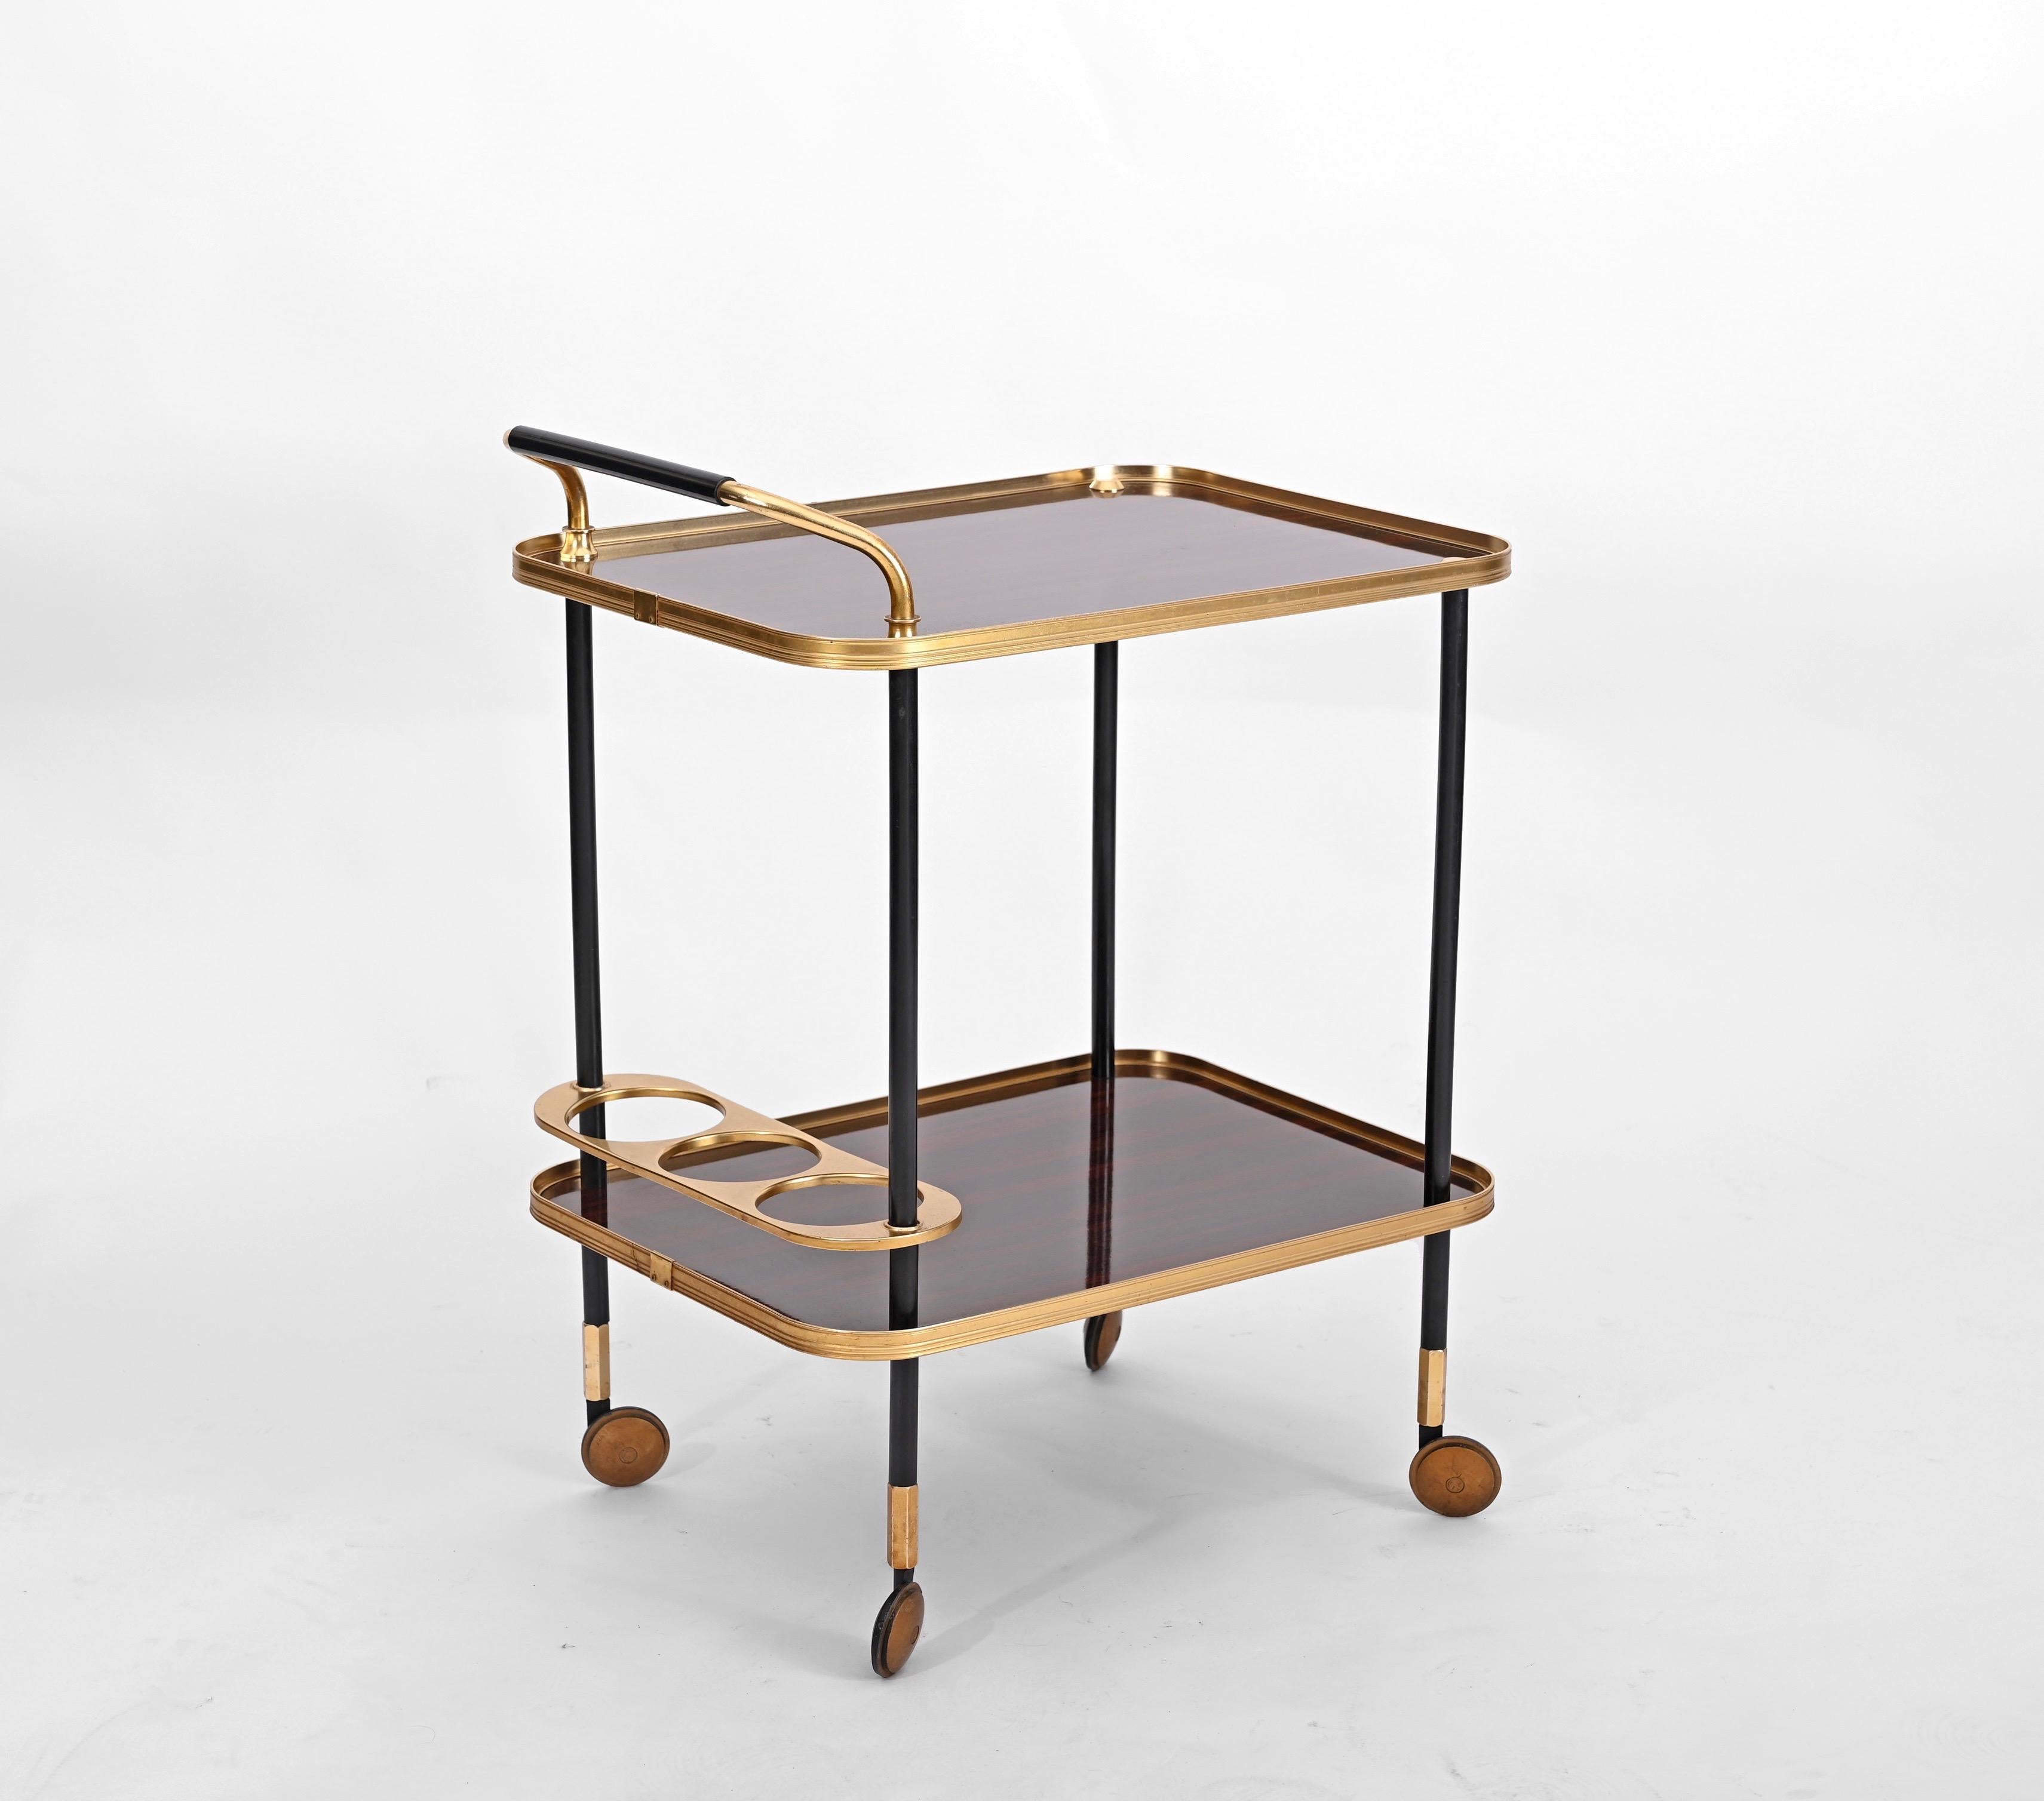 Italian Ico Parisi Bar Cart with Bottle Holder, Formica and Brass, MB Italy, 1960s